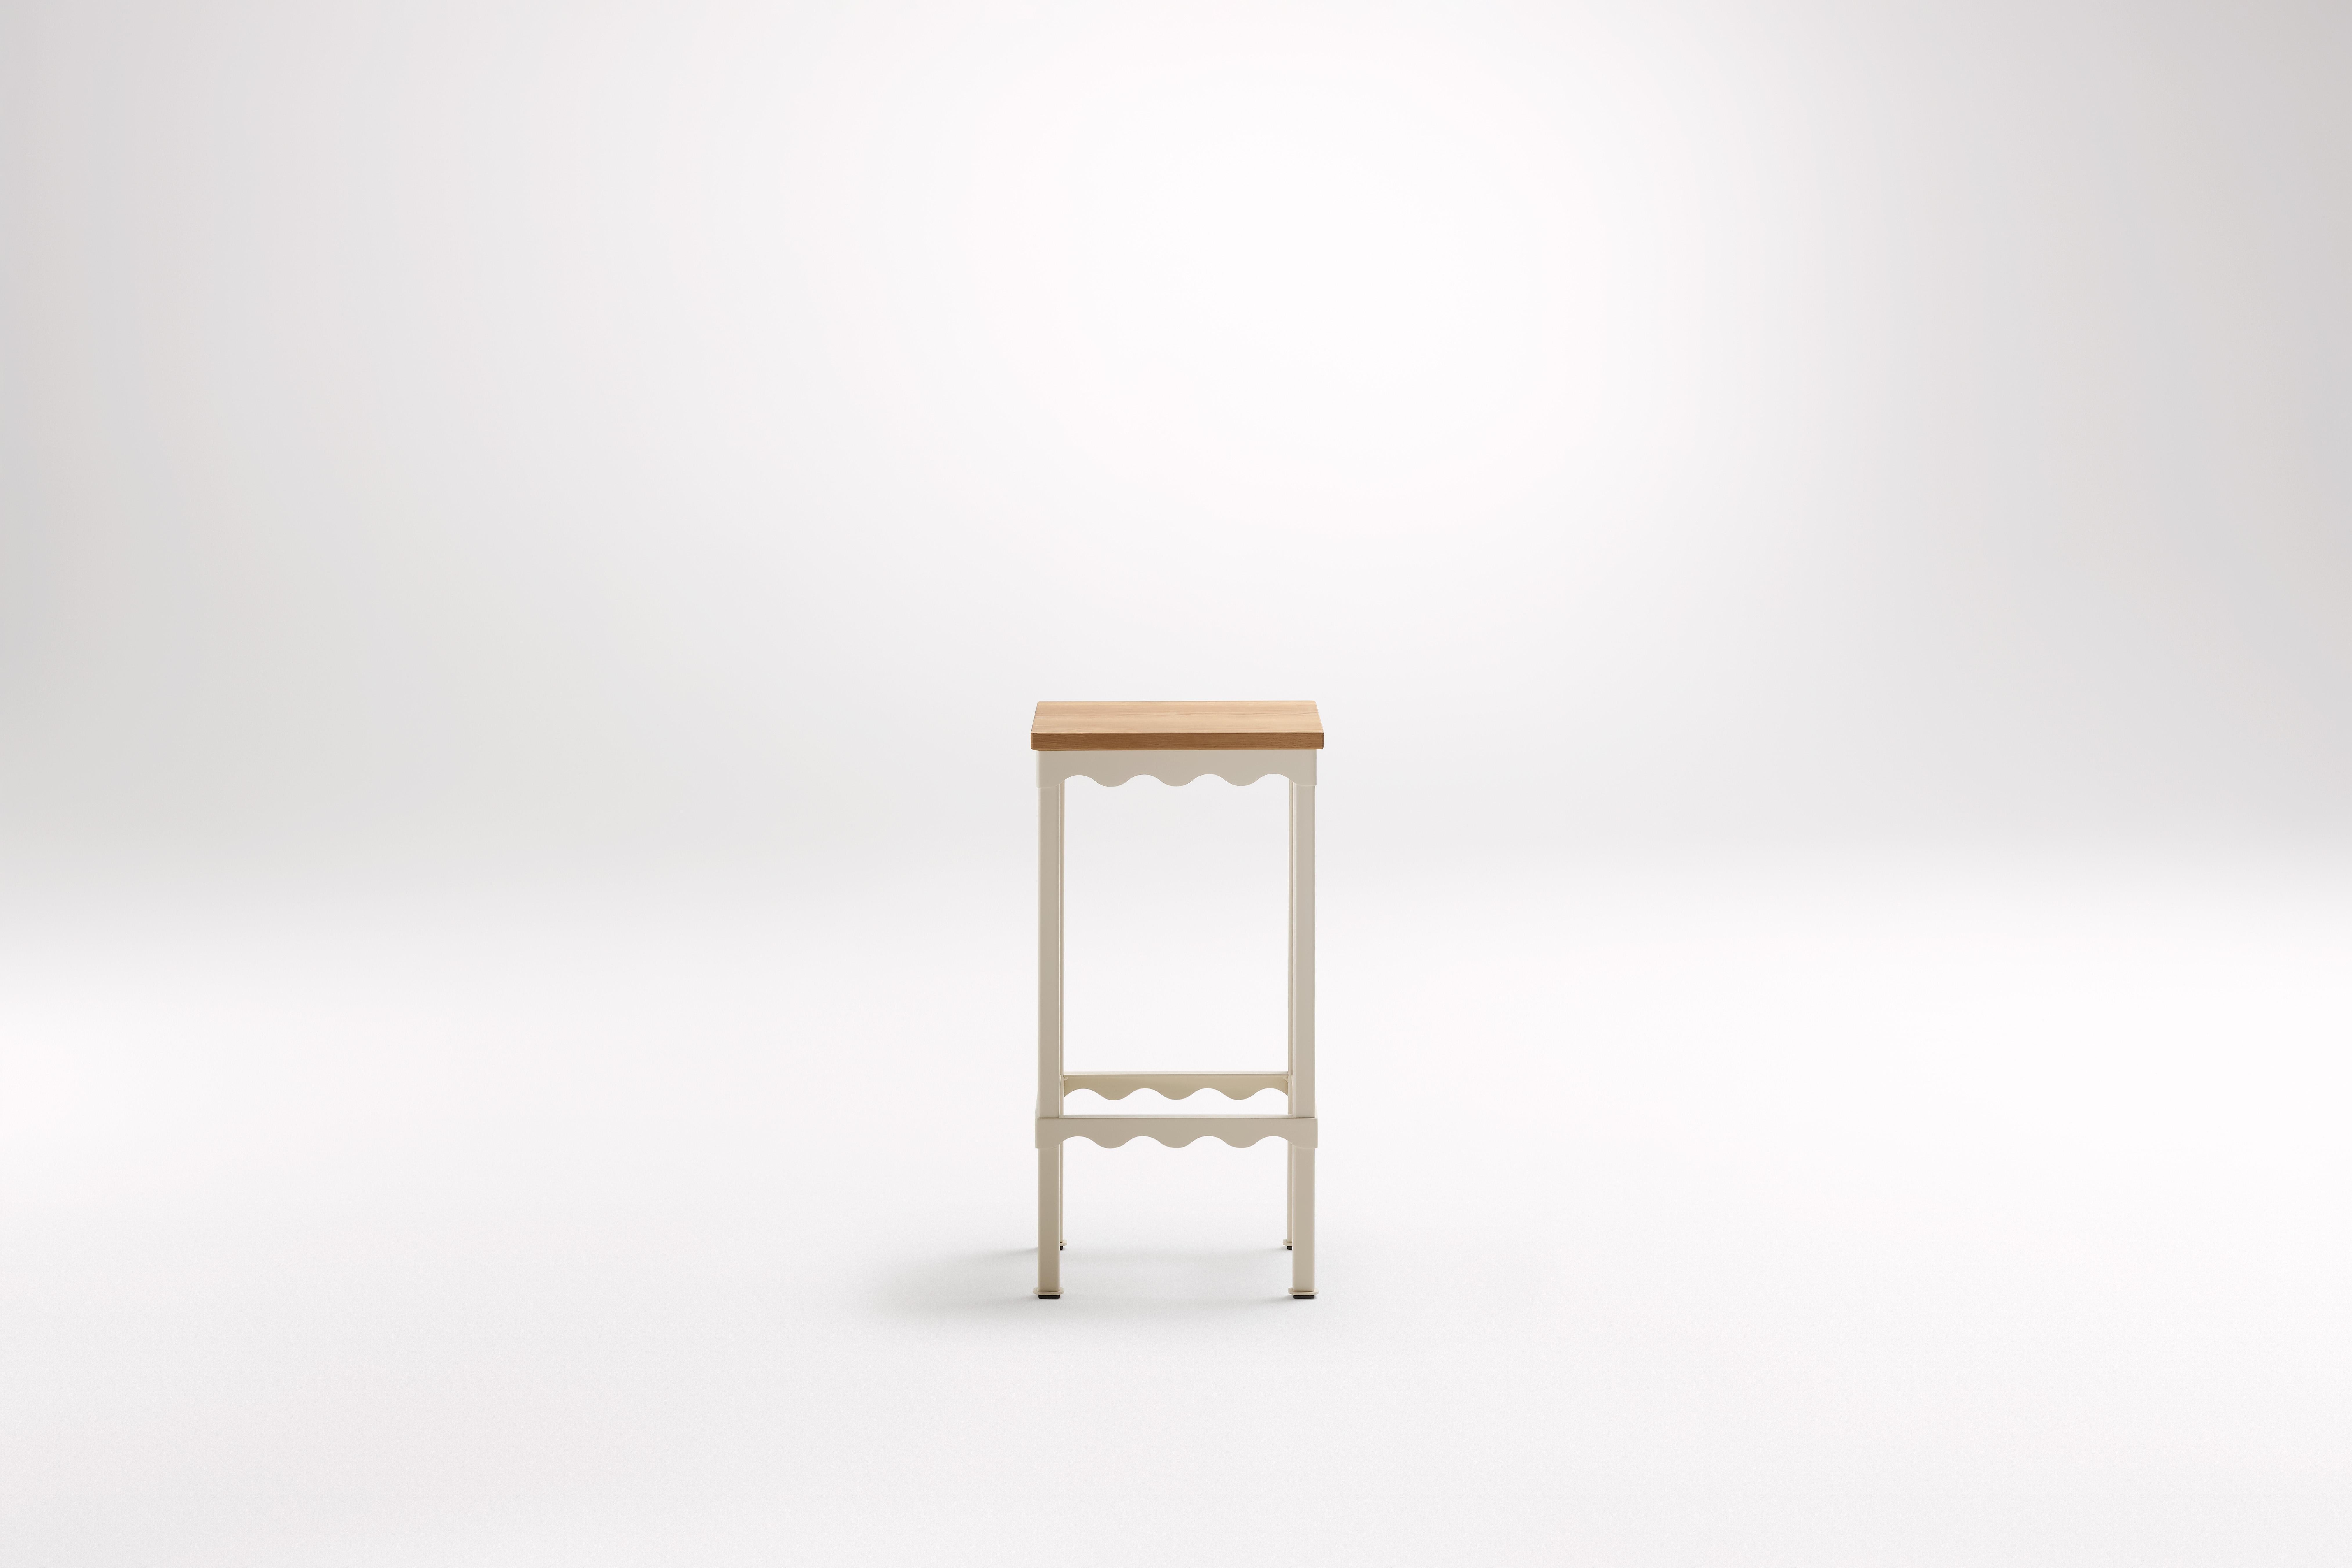 American Oak Bellini High Stool by Coco Flip
Dimensions: D 34 x W 34 x H 65/75 cm
Materials: Timber / Stone tops, Powder-coated steel frame. 
Weight: 8kg
Frame Finishes: Textura Paperbark.

Coco Flip is a Melbourne based furniture and lighting